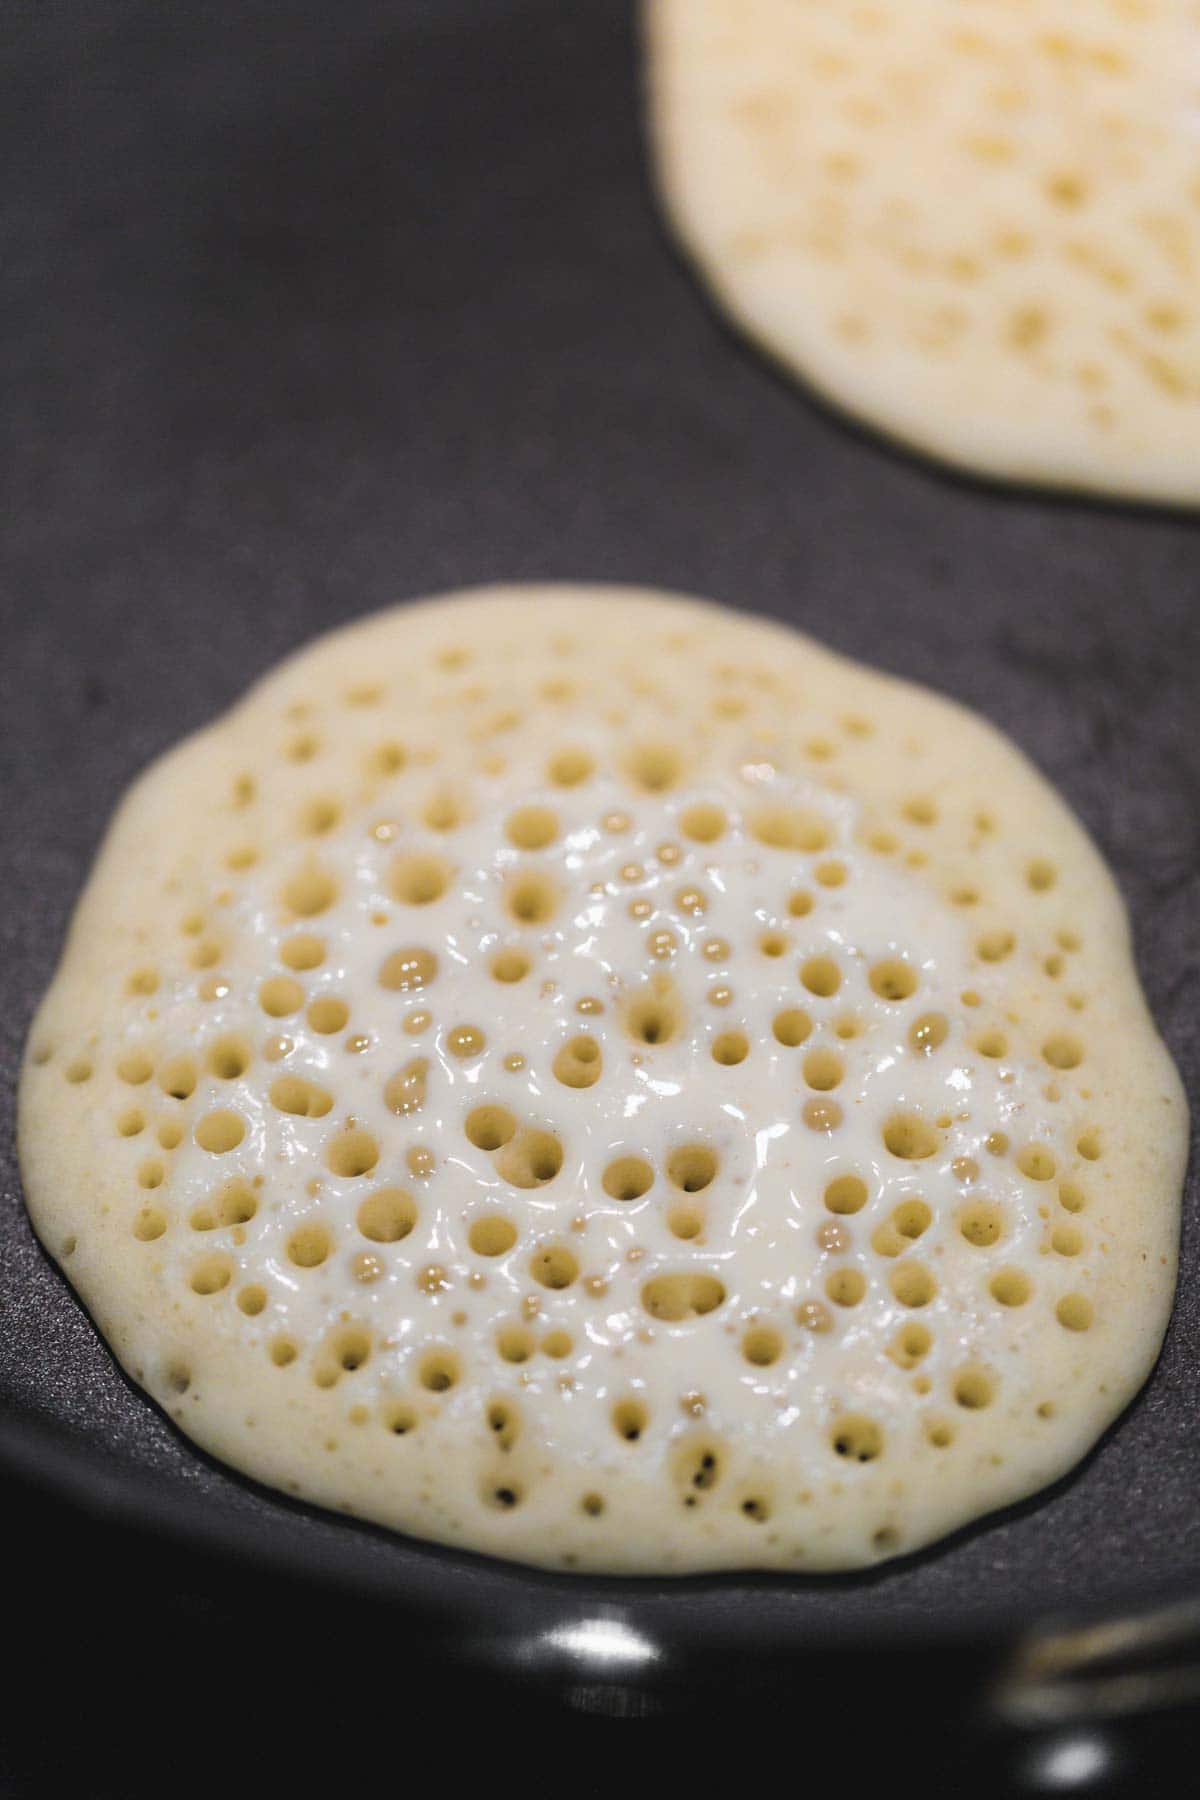 Frying the atayef pancakes on a dry pan